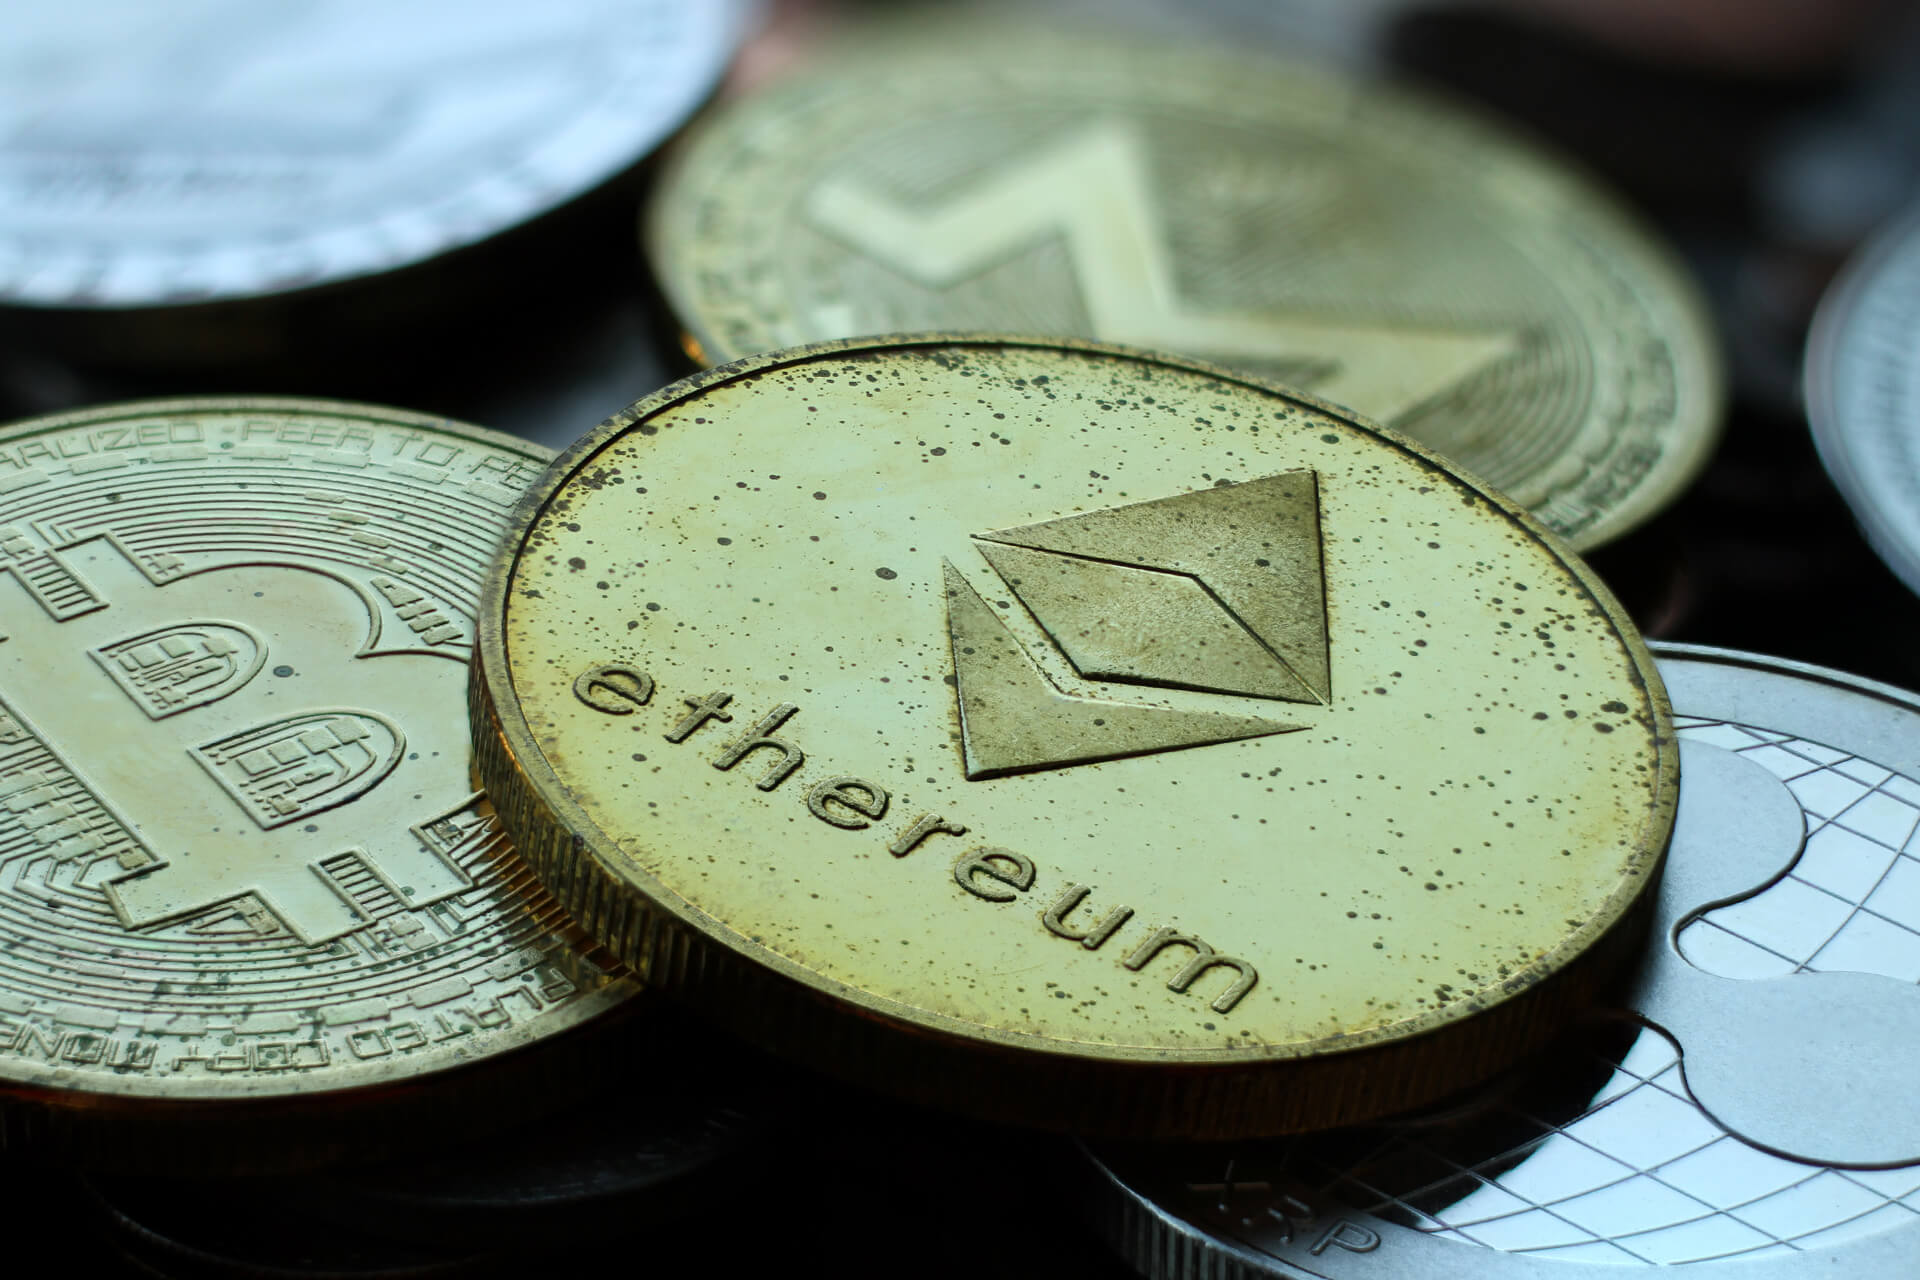 Tarnished cryptocurrency coins free image download